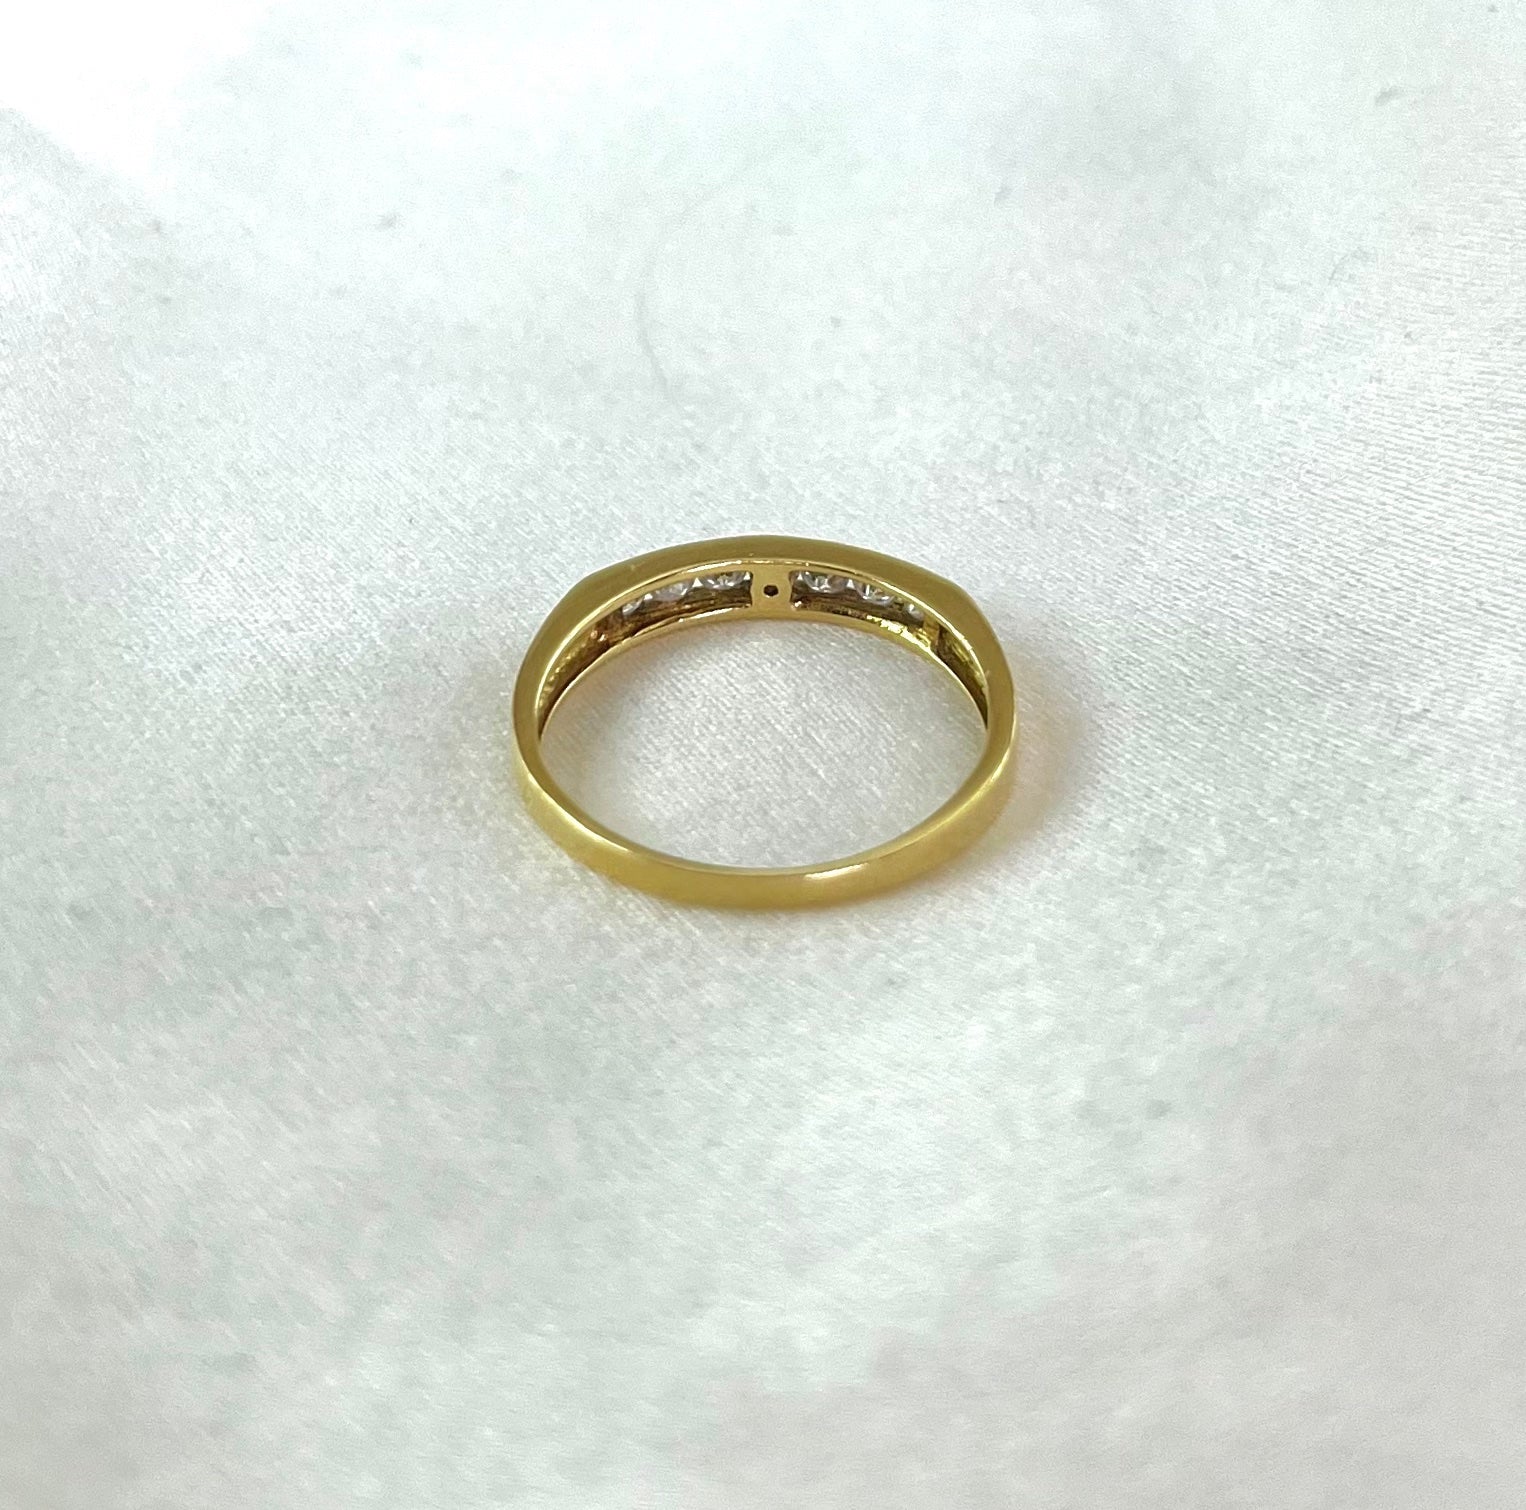 Vintage 18ct Gold Seven Stone Diamond Half Eternity Ring with Channel Setting, 0.25ct Size N + 0.5